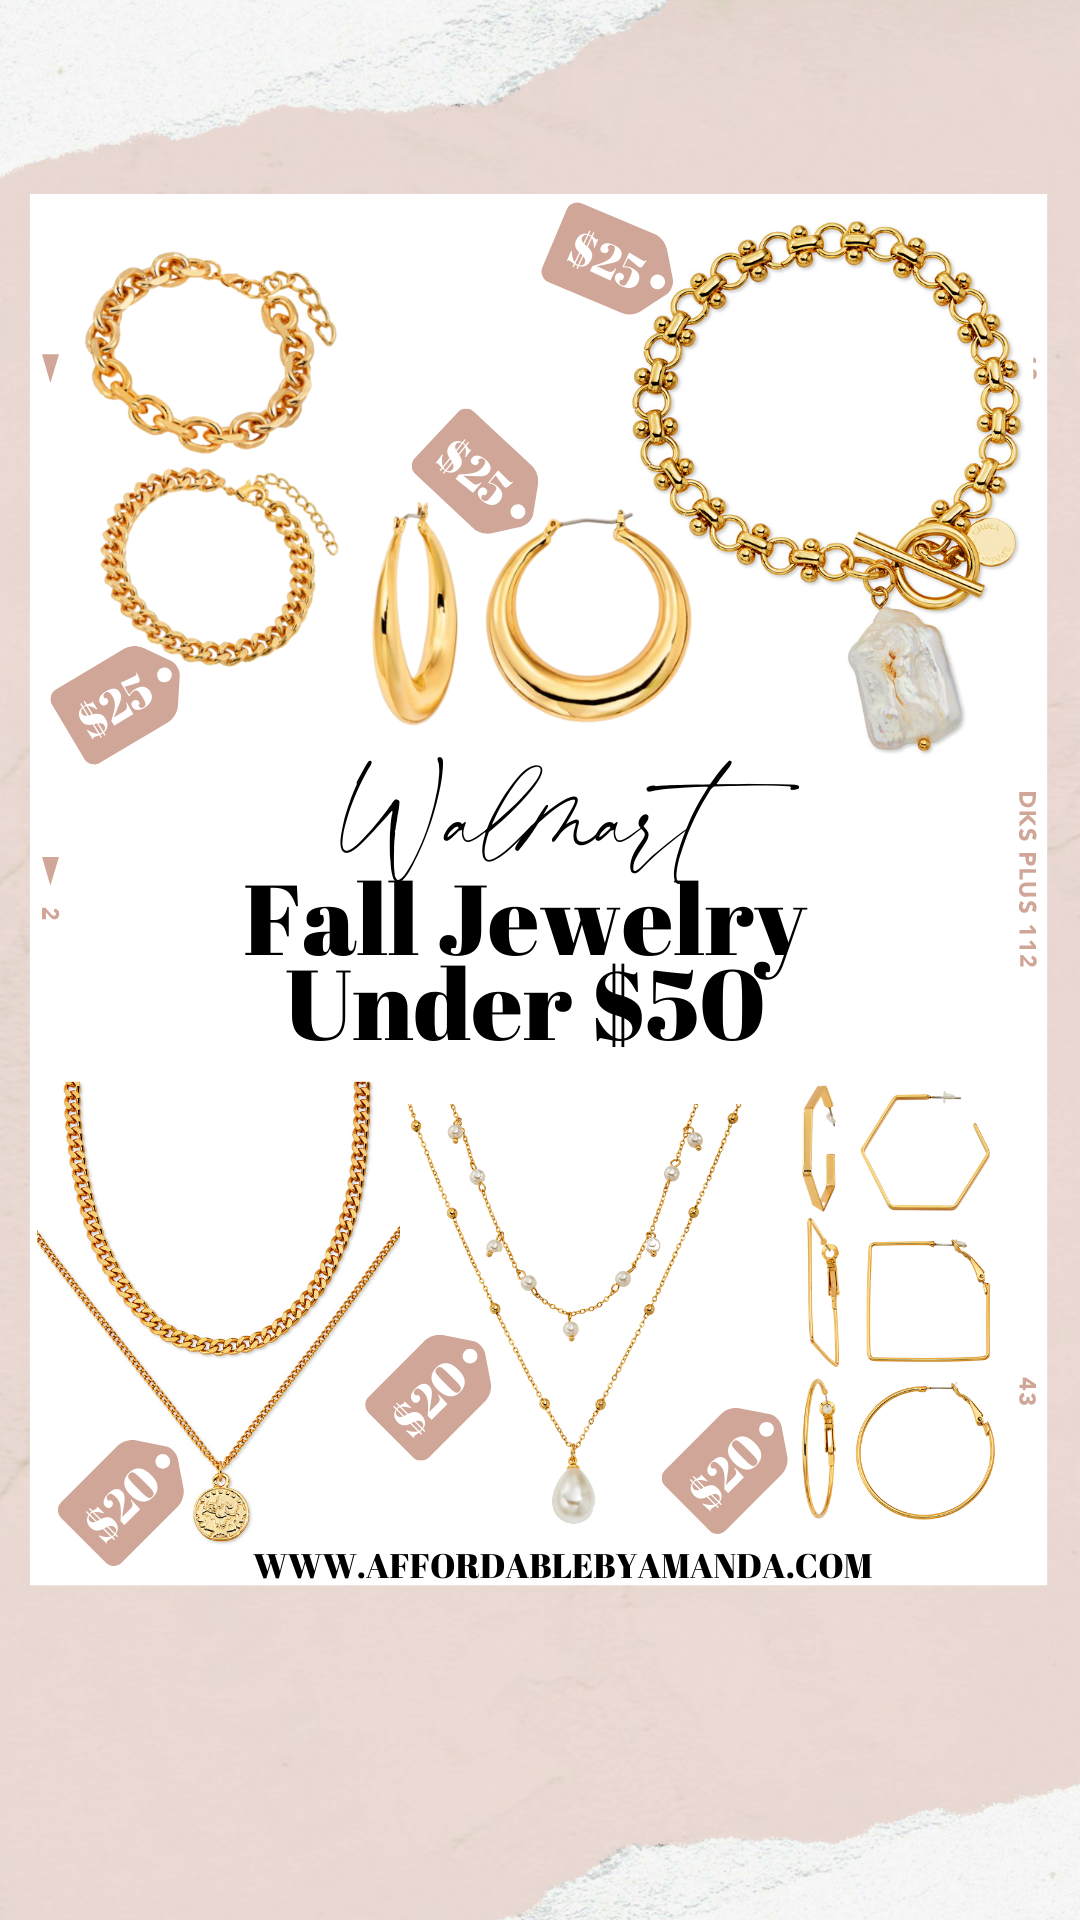 Sccop Jewelry - WALMART FASHION: NEW AFFORDABLE JEWELRY FINDS - Affordable by Amanda